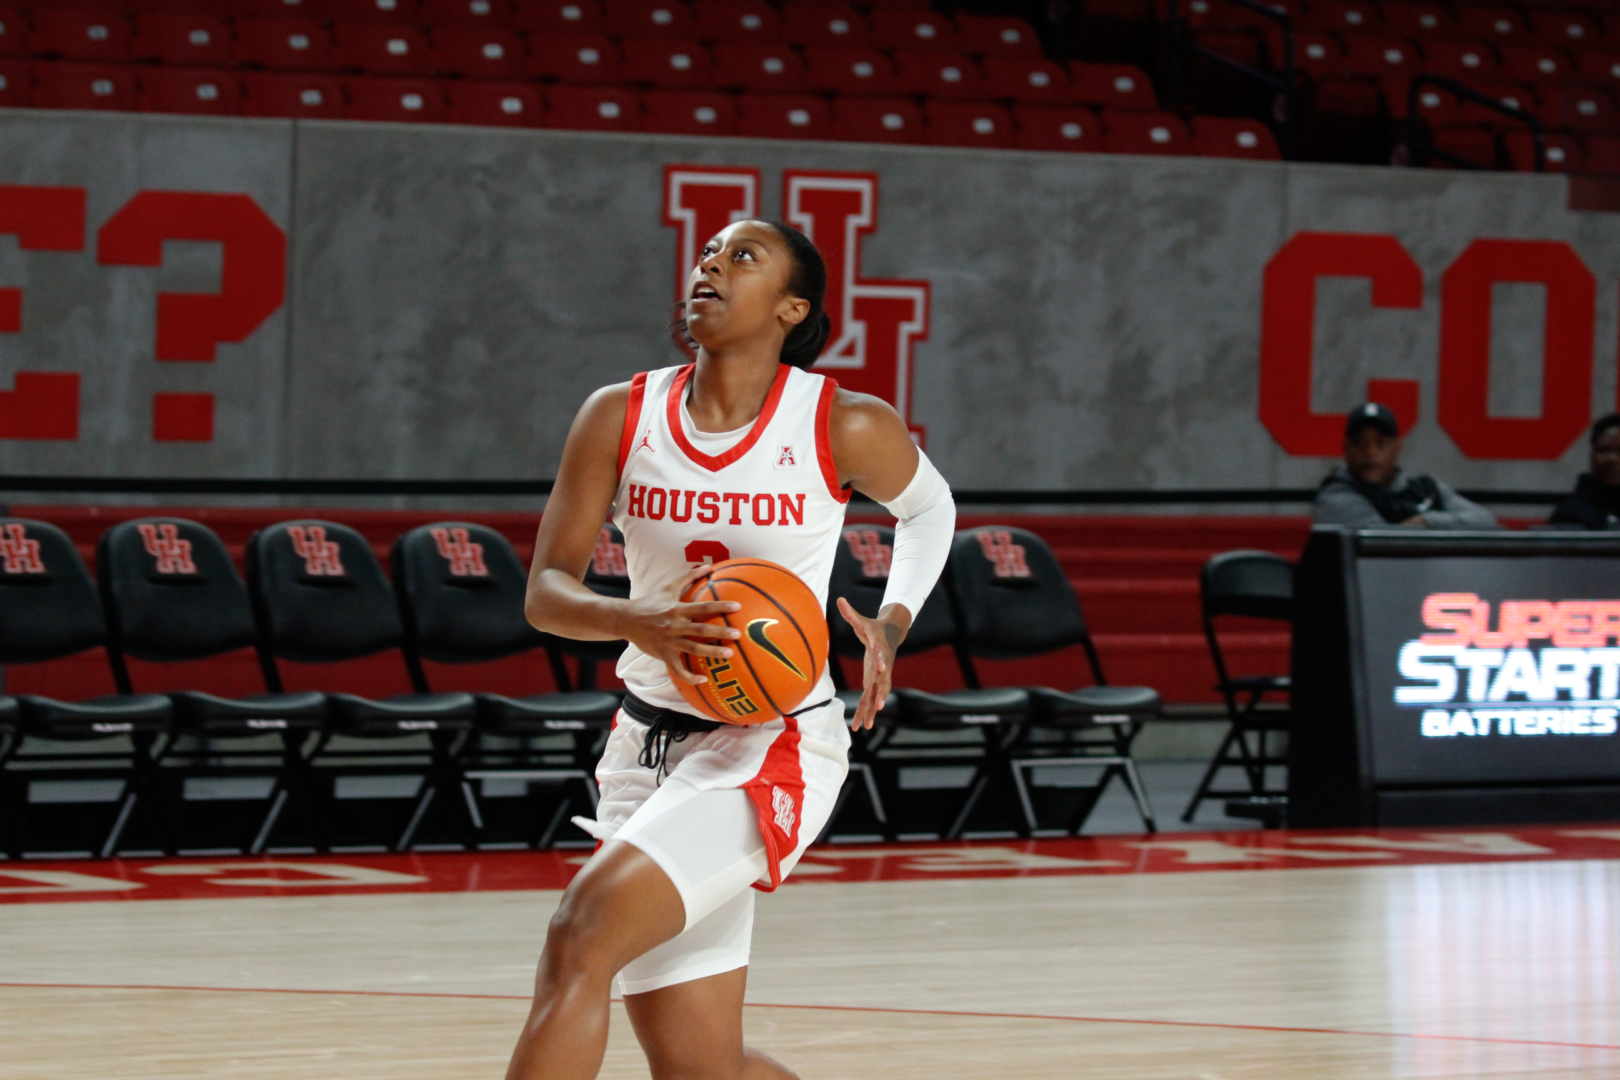 UH guard Tiara Young's 18 points and seven assists powered the Cougars past Jacksonville State on Thursday night at Fertitta Center. | Esther Umoh/The Cougar